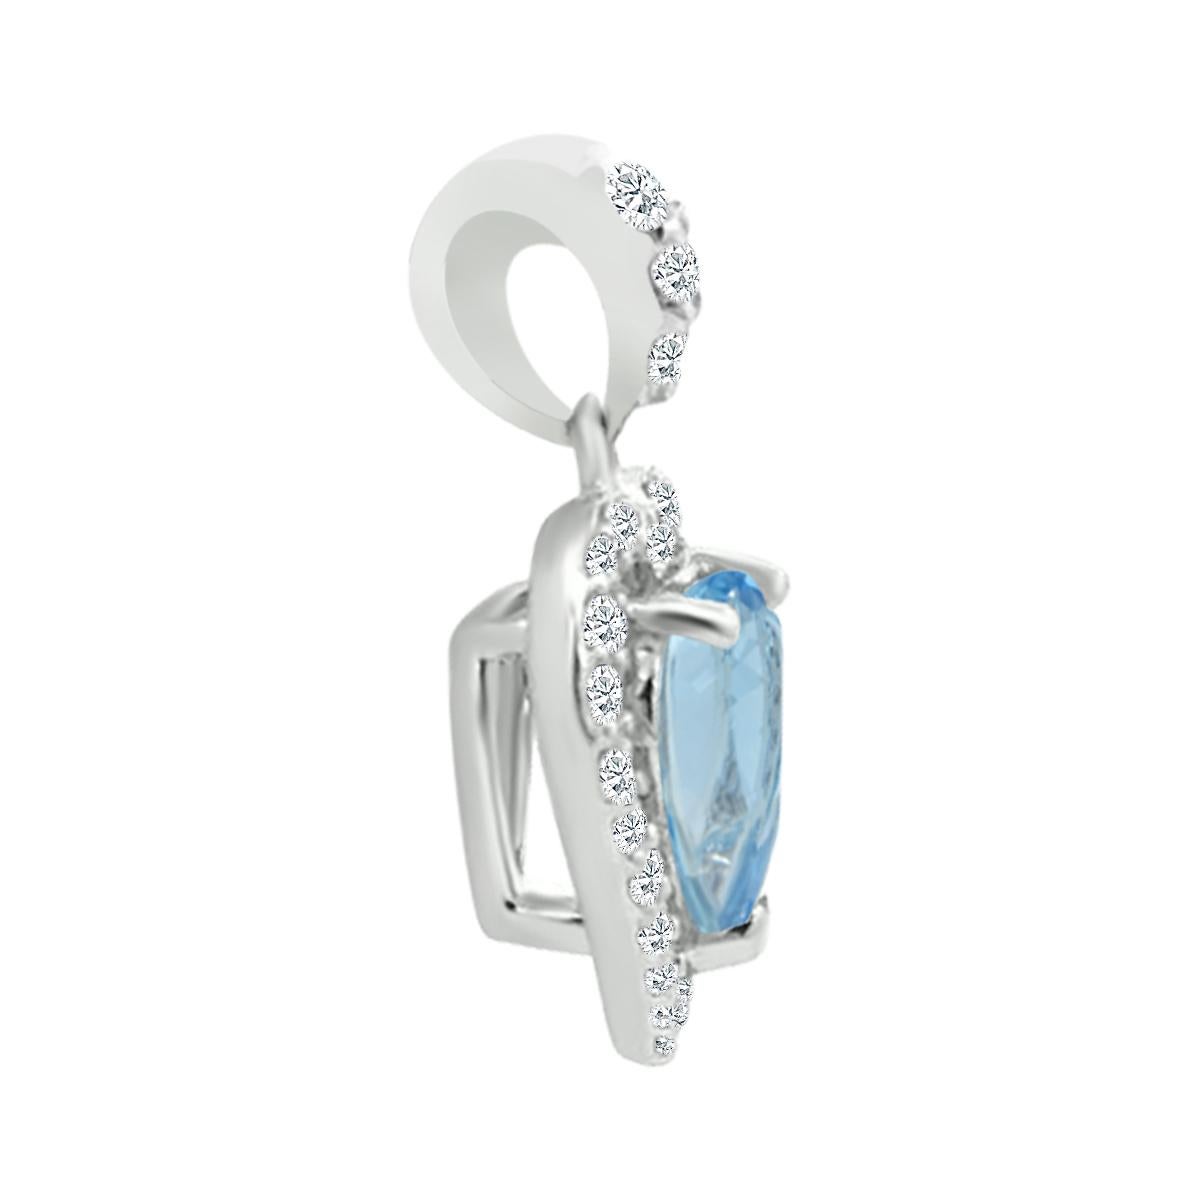 Love Never End - Heart In A Display Of Harmony, A Timeless Design In A Collection To Life's Most Memorable Loves.
Heart Pendant For Women, Girls. This pendant is Made in 14K White Gold And Pendant Features a Beautiful 6mm March Birthstone Aquamarine